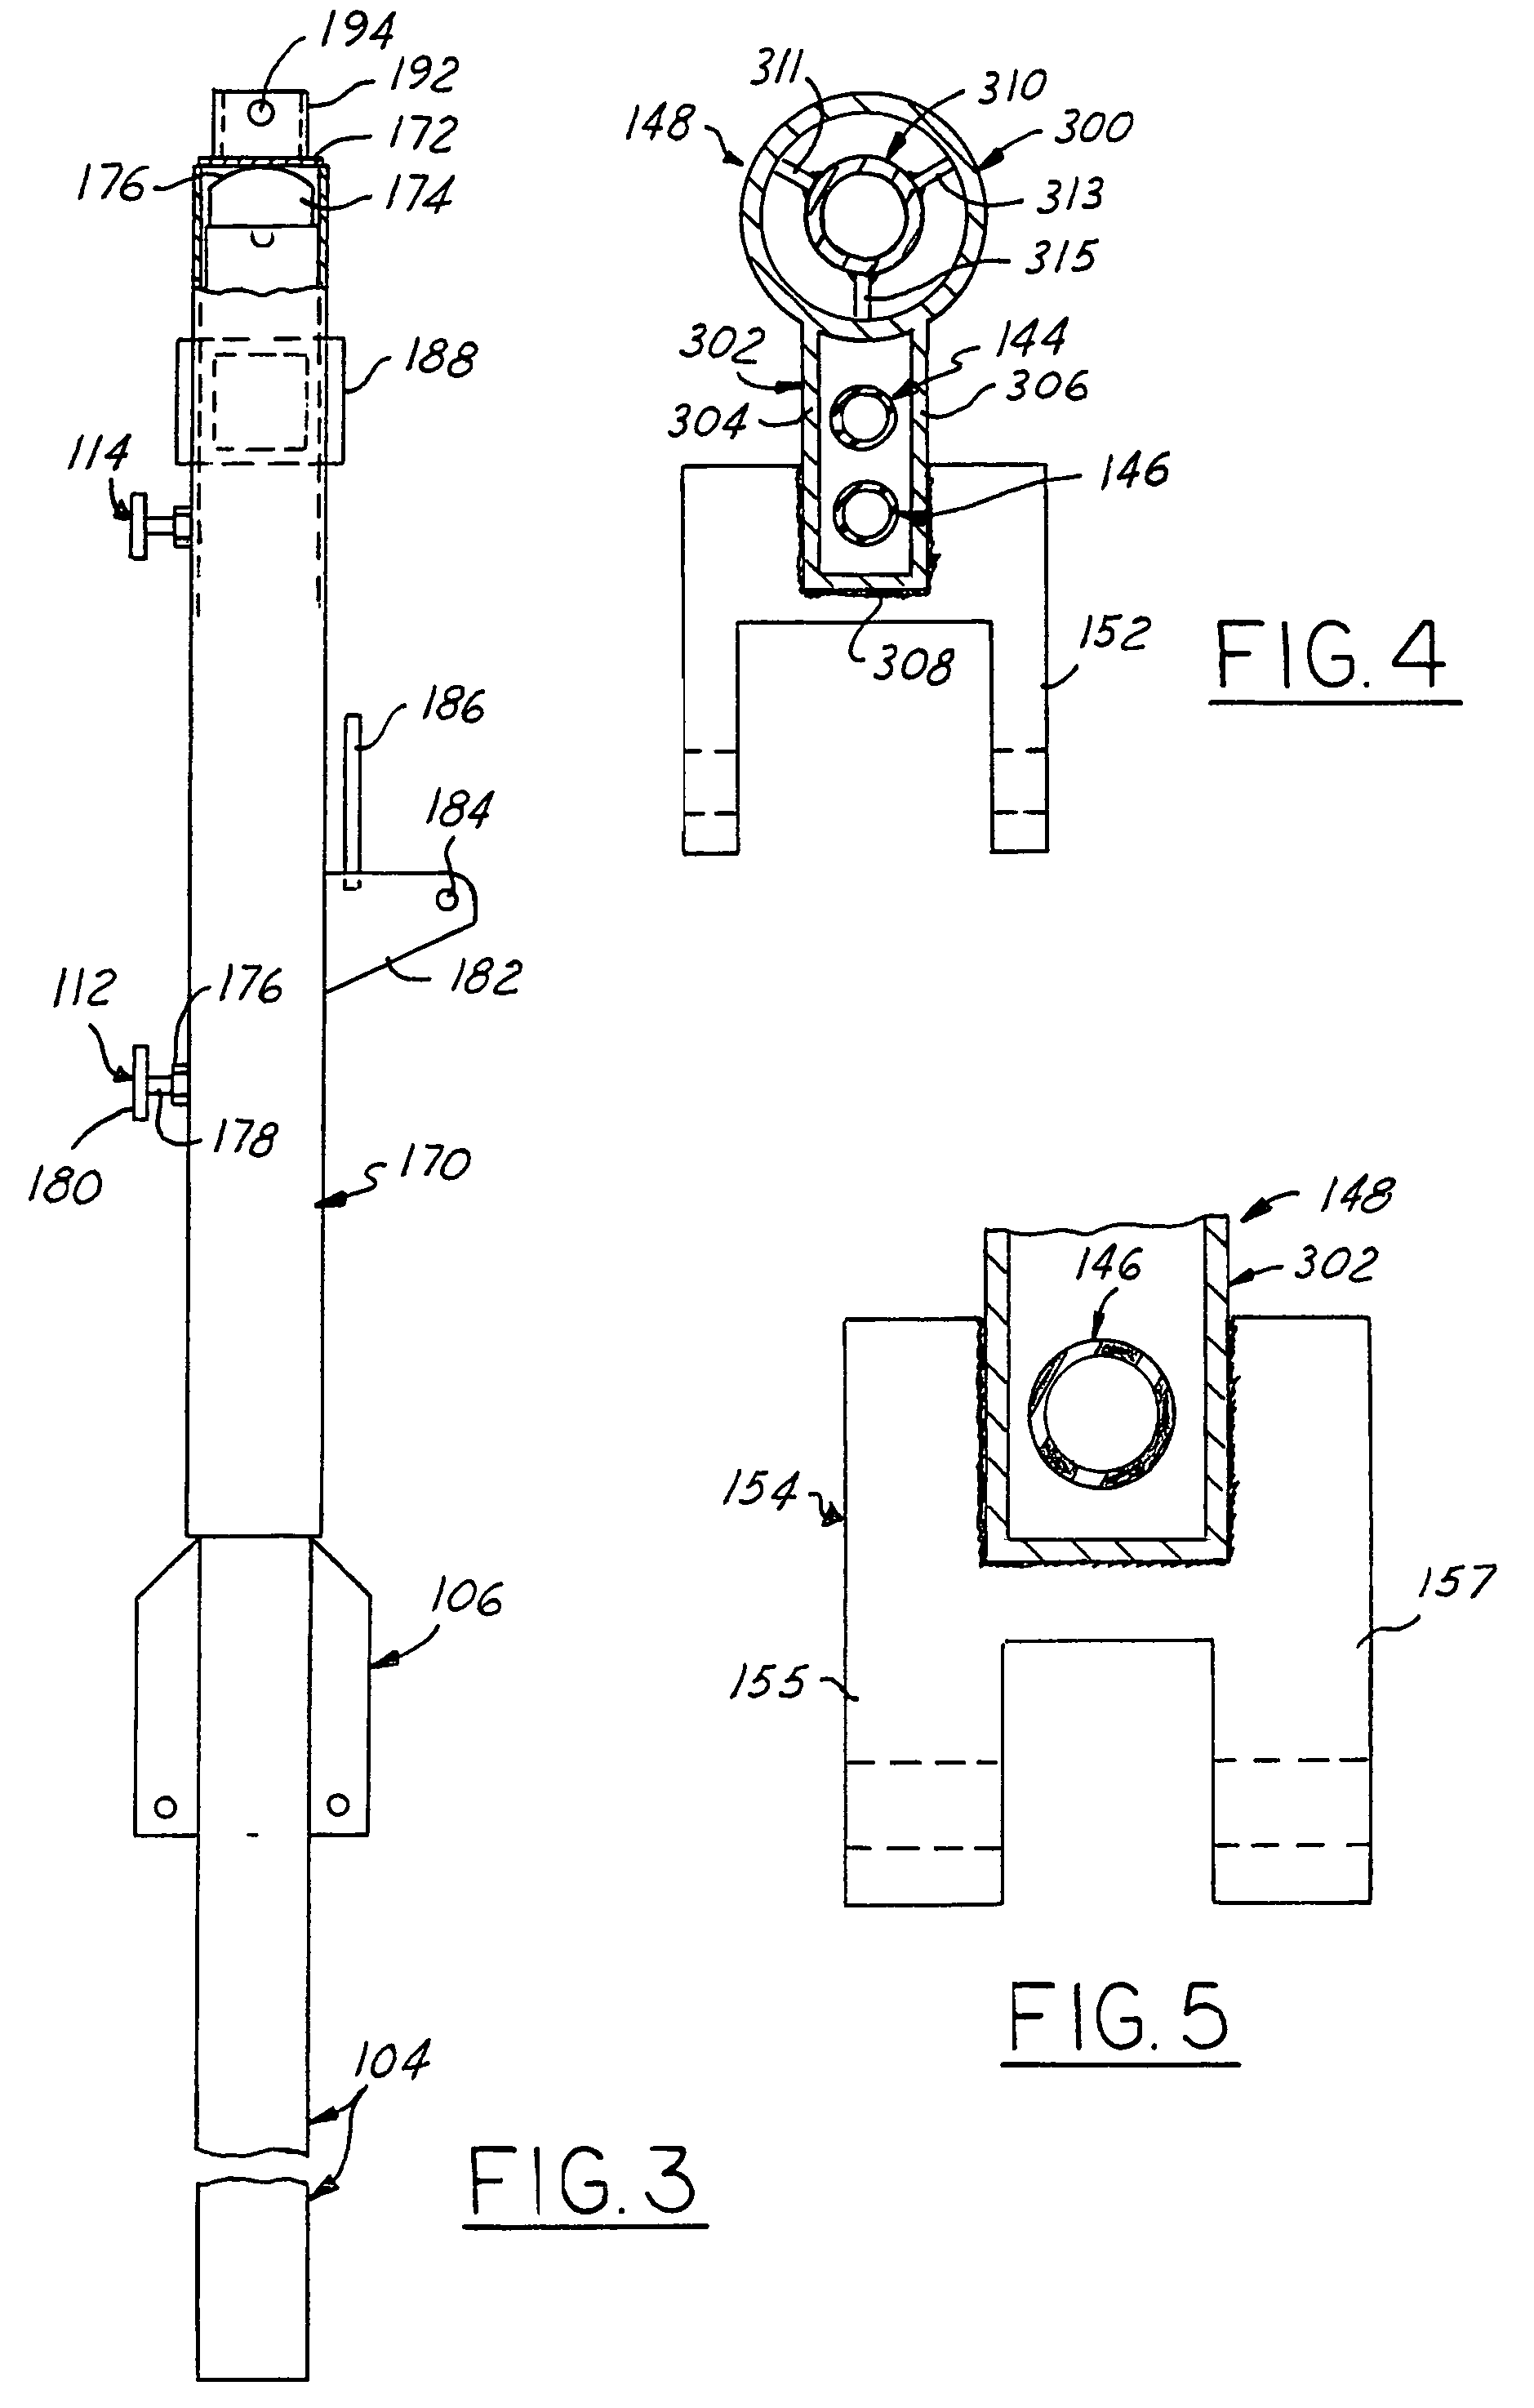 Method and apparatus for making snow